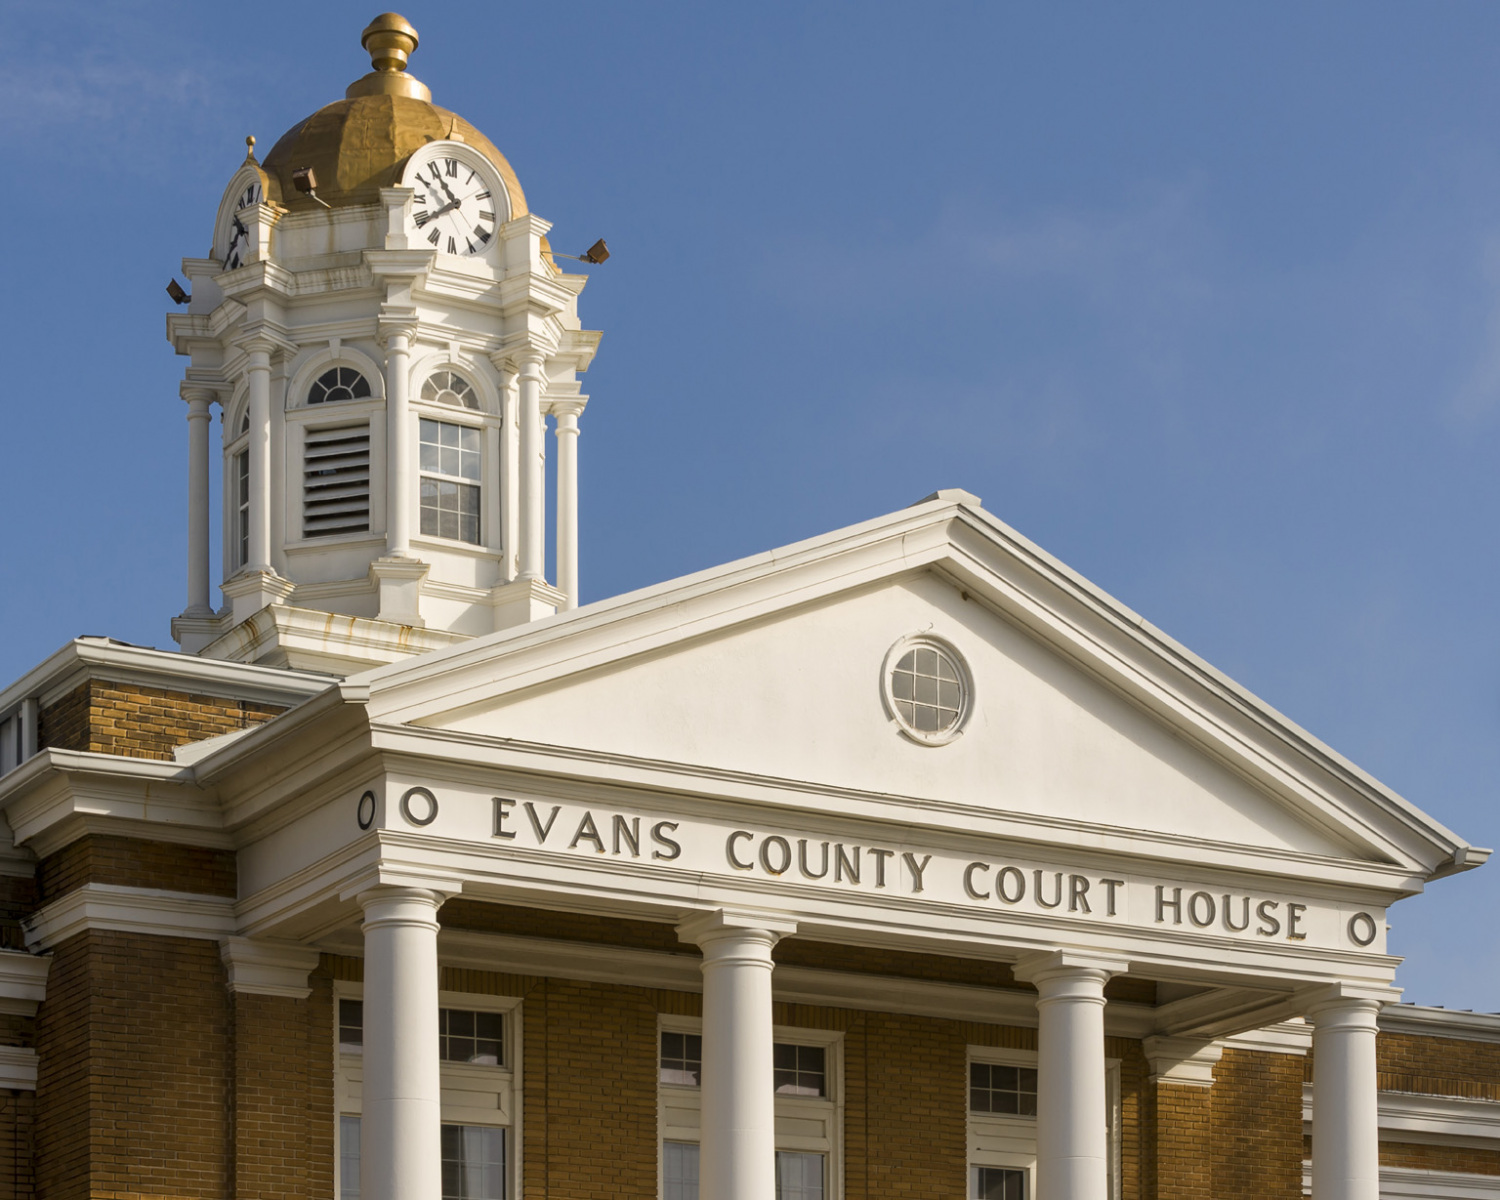 A photo of the clock tower of the Evans County Courthouse in Claxton, Georgia.  The Claxton courthouse was designed by James J. Baldwin.  The Evans County Courthouse, a brick Classical Revival structure, was built in 1923 and is listed on the National Register of Historic Places.  This photo © Capitolshots Photography/TwoFiftyFour Photos, LLC, ALL RIGHTS RESERVED.